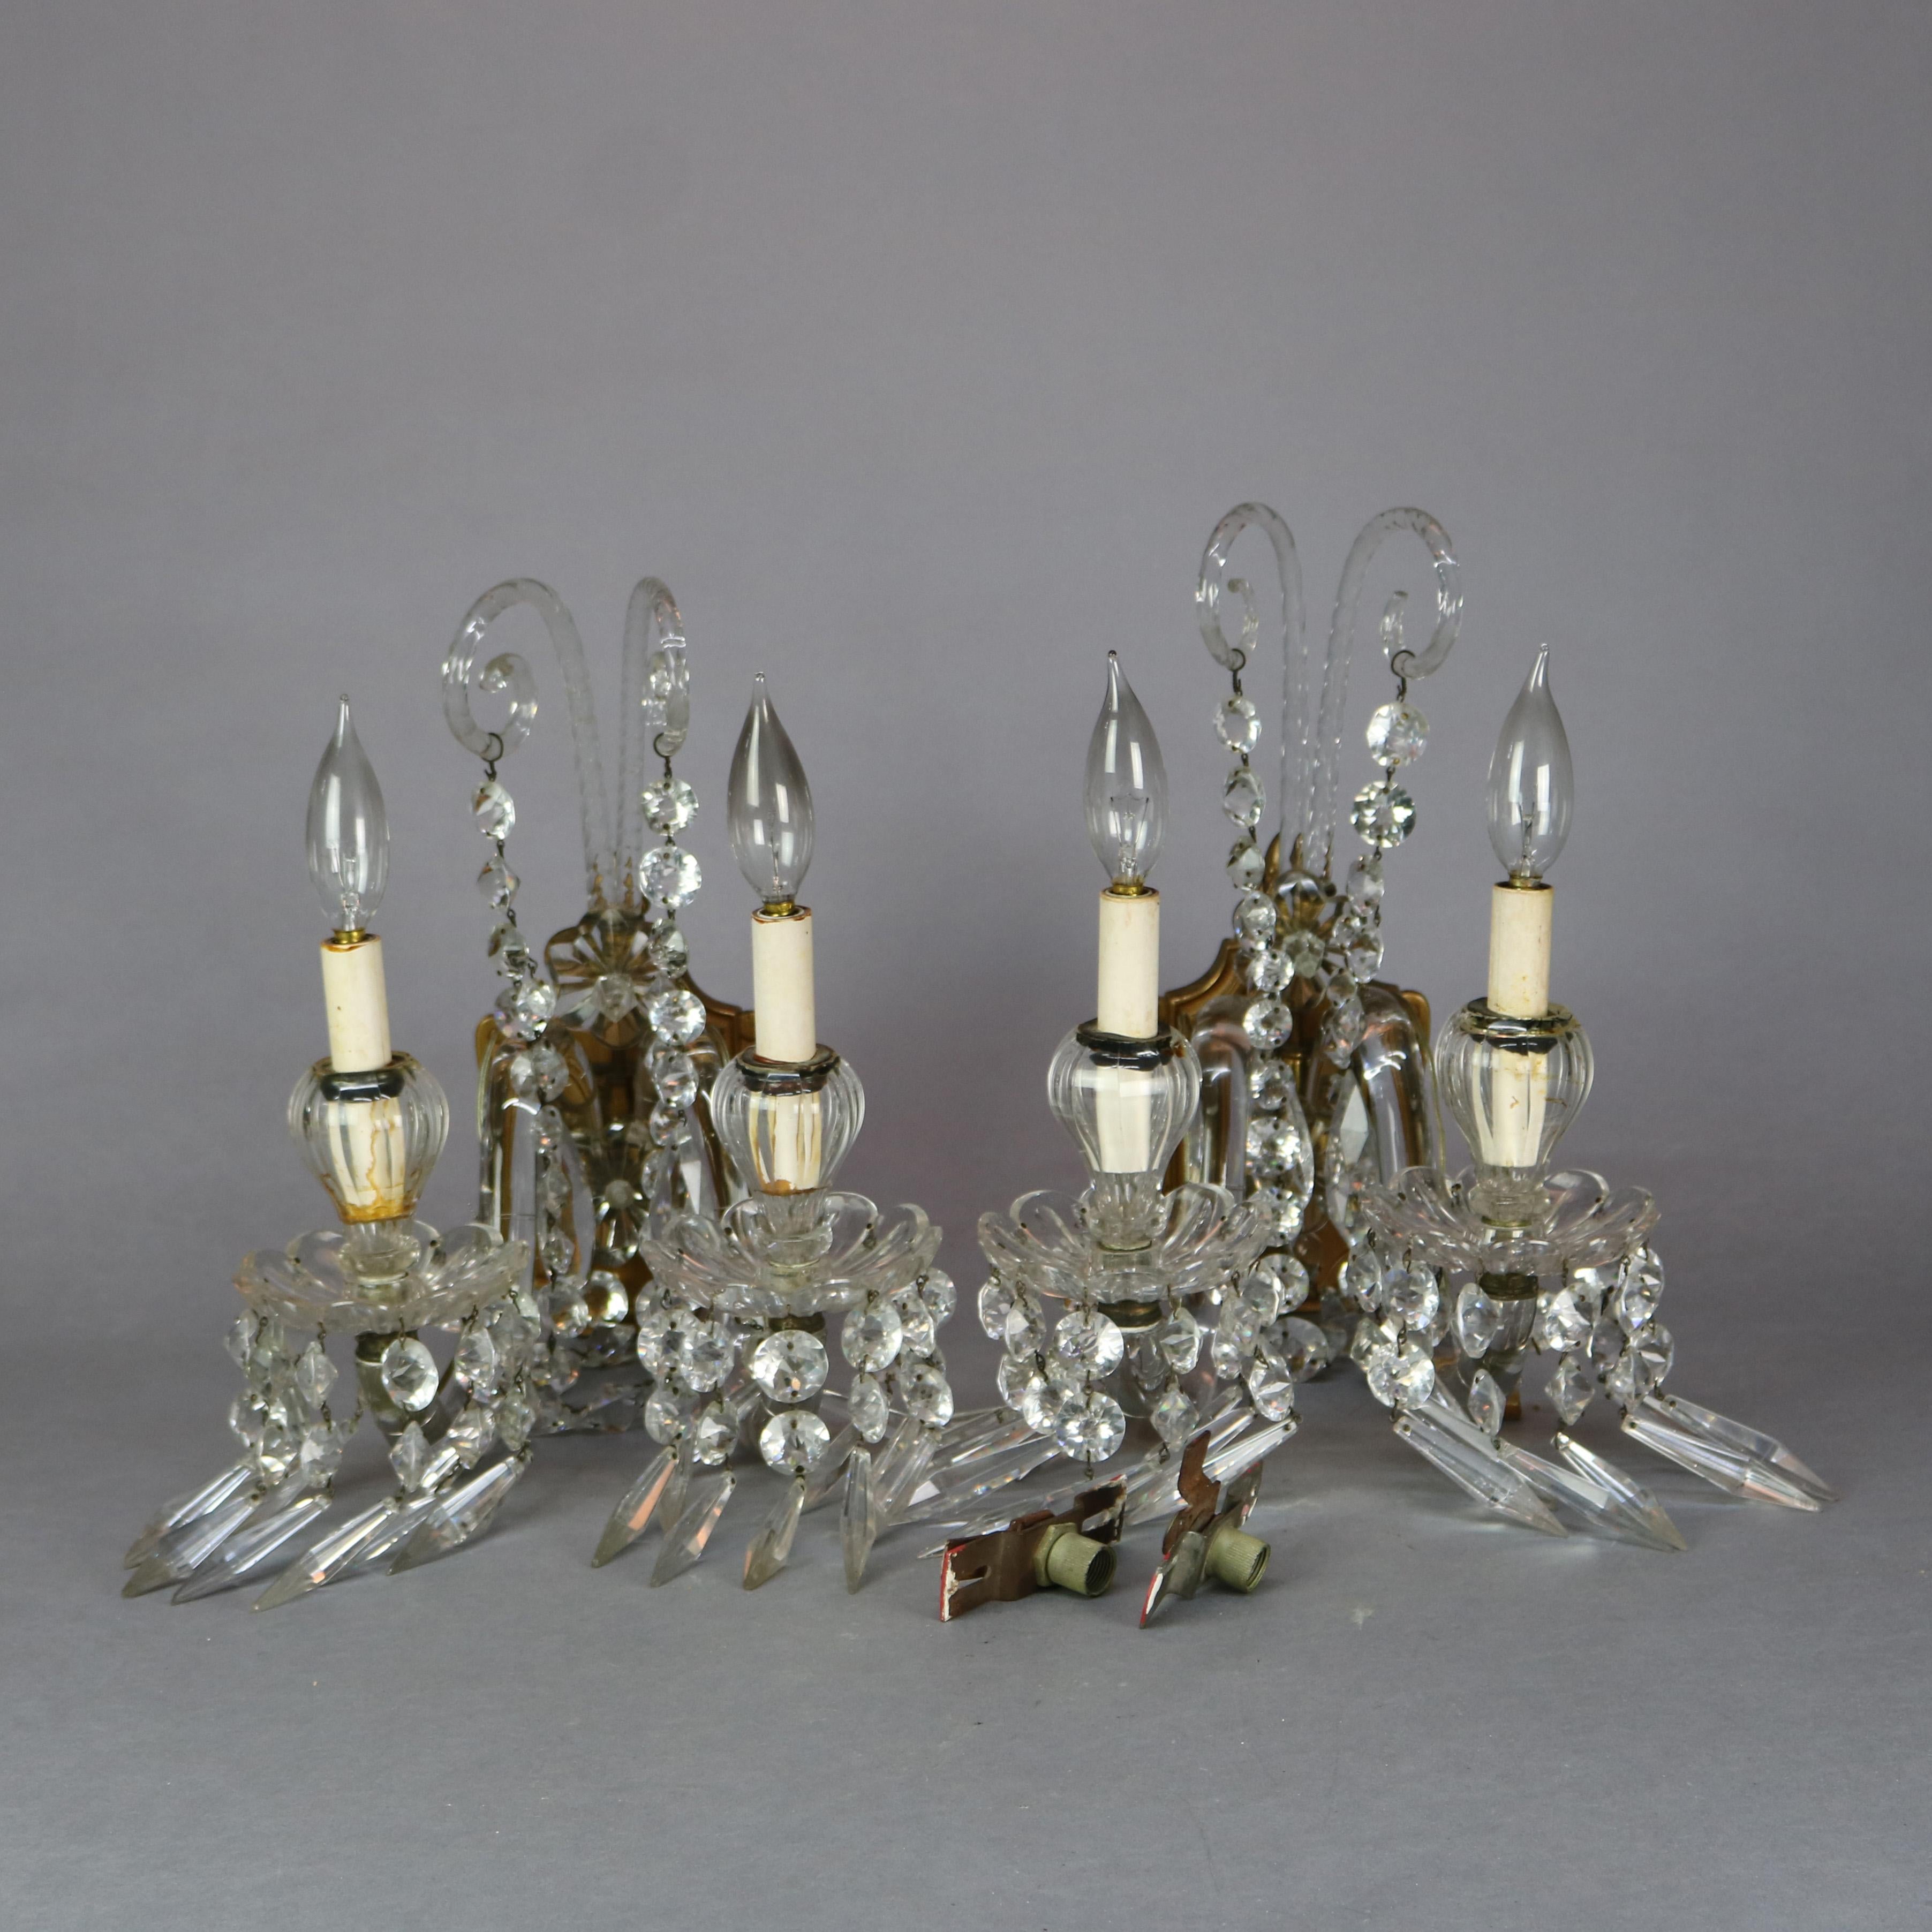 Vintage Baccarat School Cut Crystal & Bronze Double Candle Wall Sconces, c1940 4